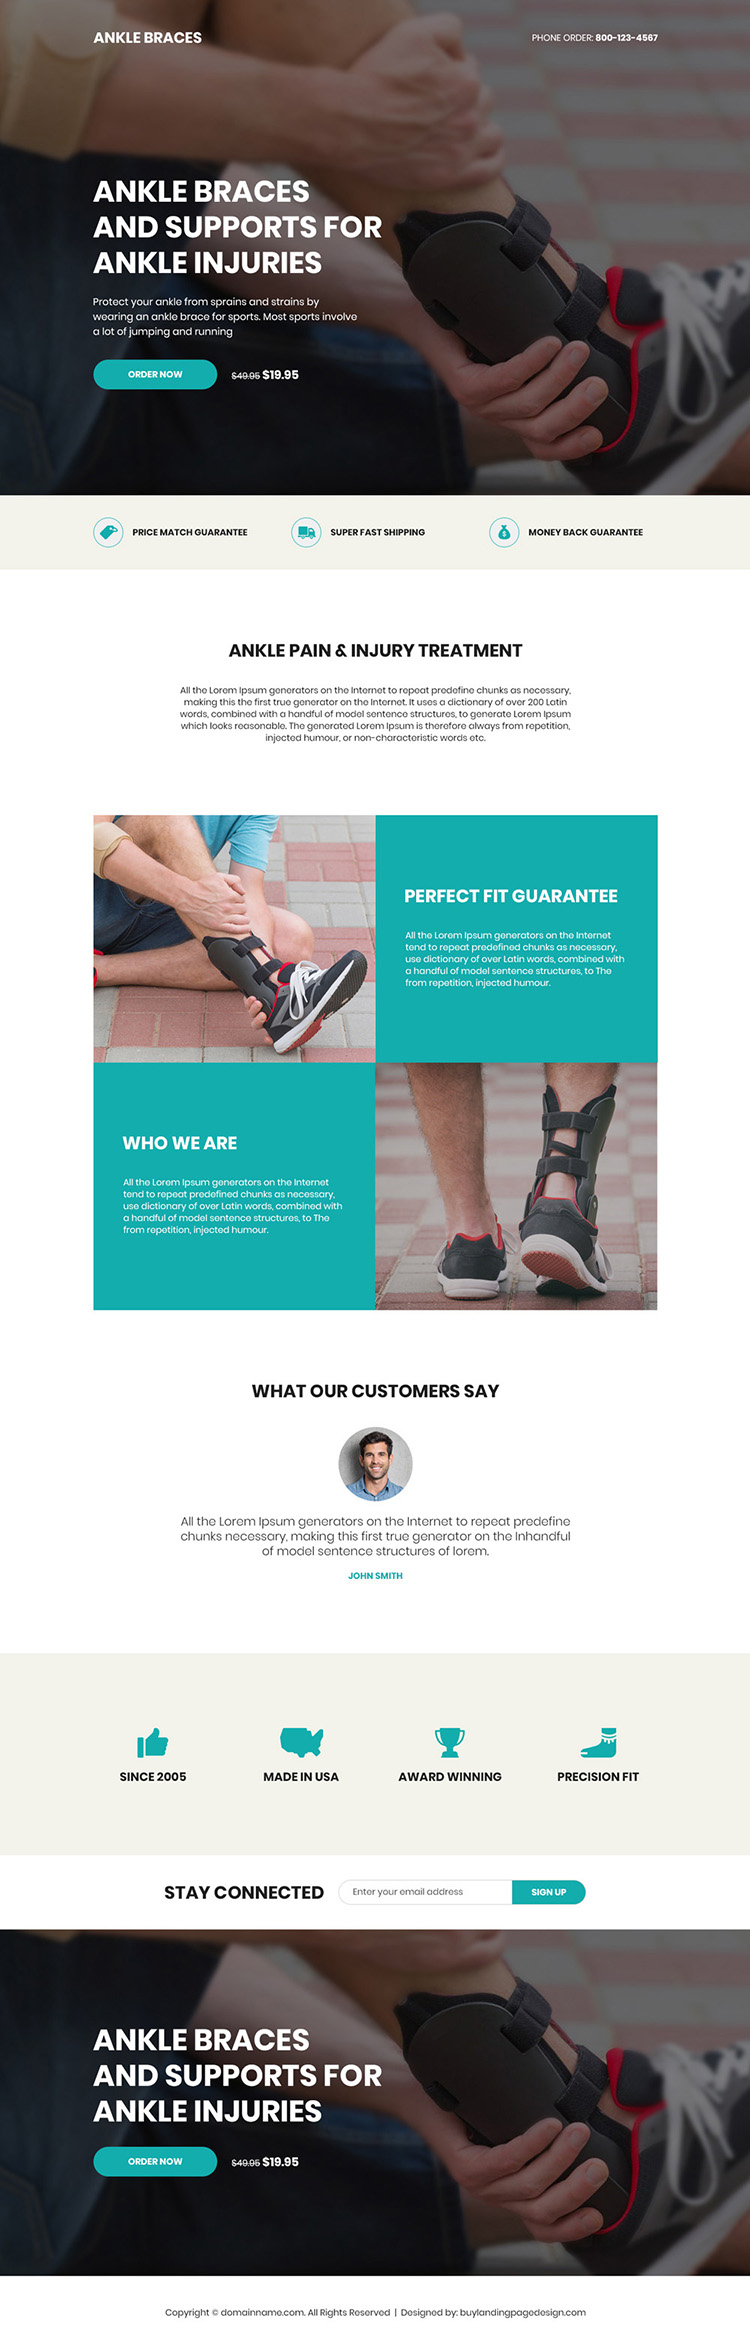 ankle brace product responsive landing page design